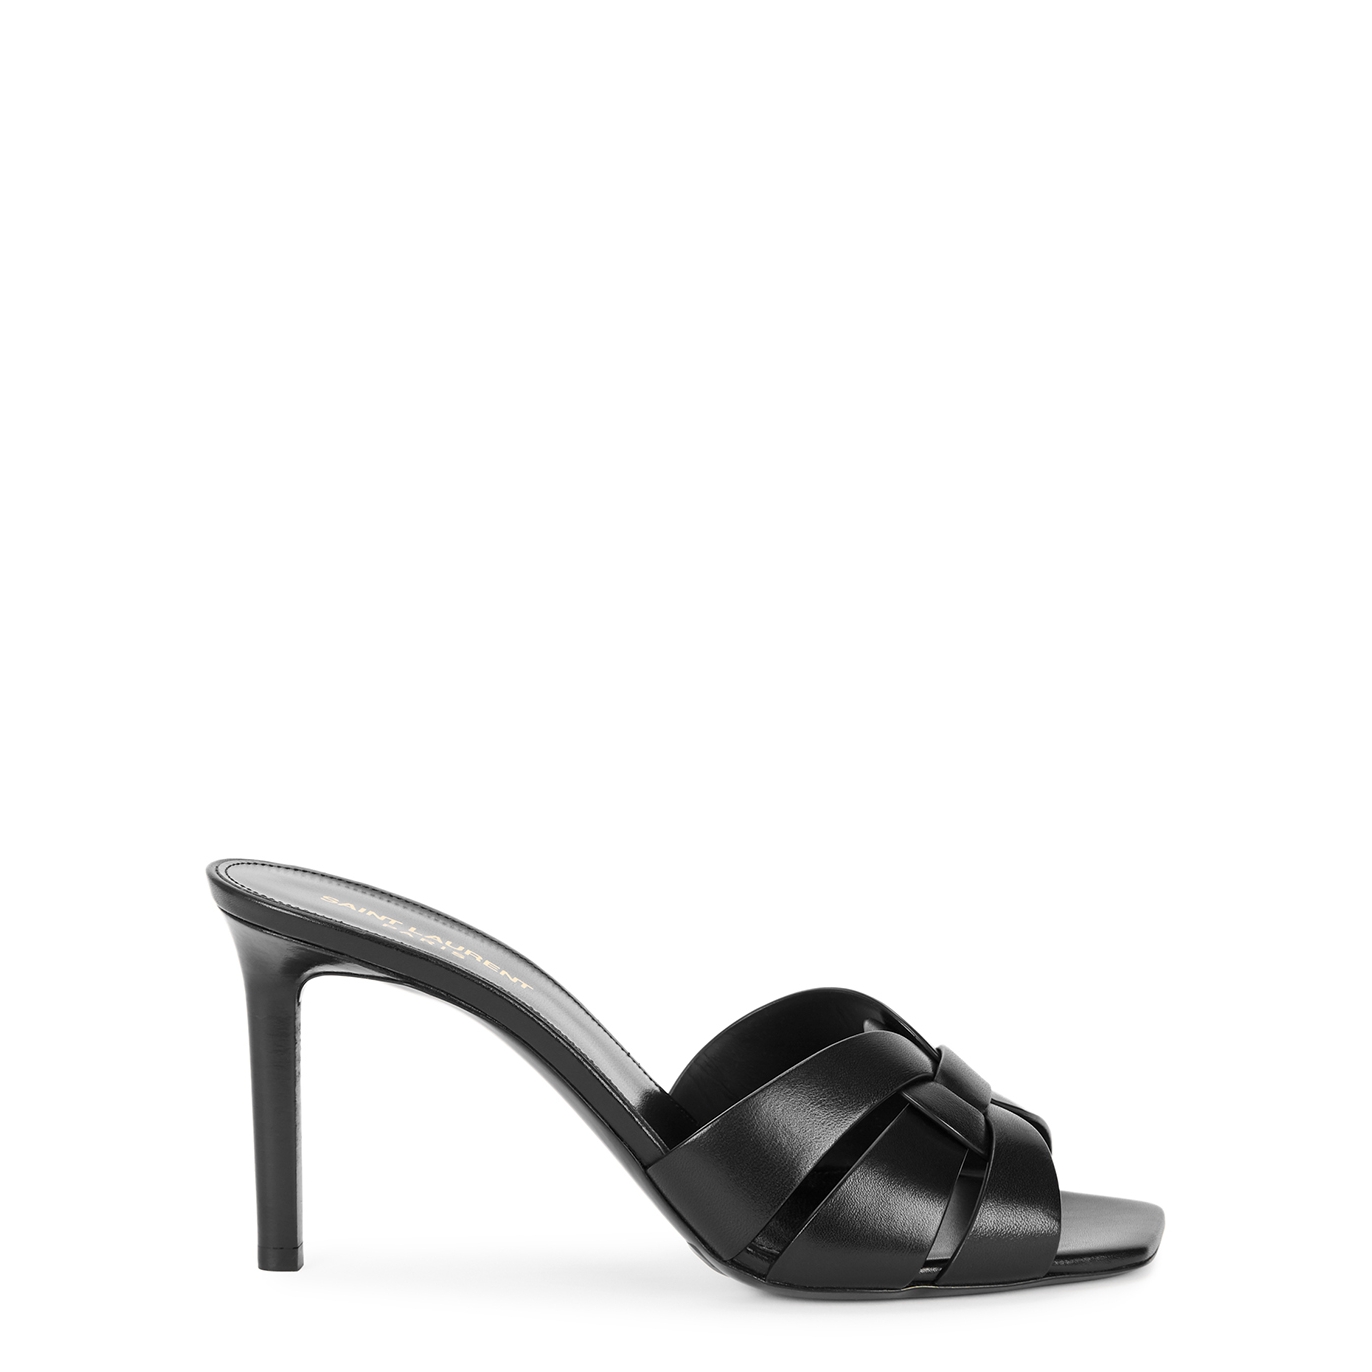 Saint Laurent Tribute 85 Black Leather Mules, Mules, Knotted Strap - 3